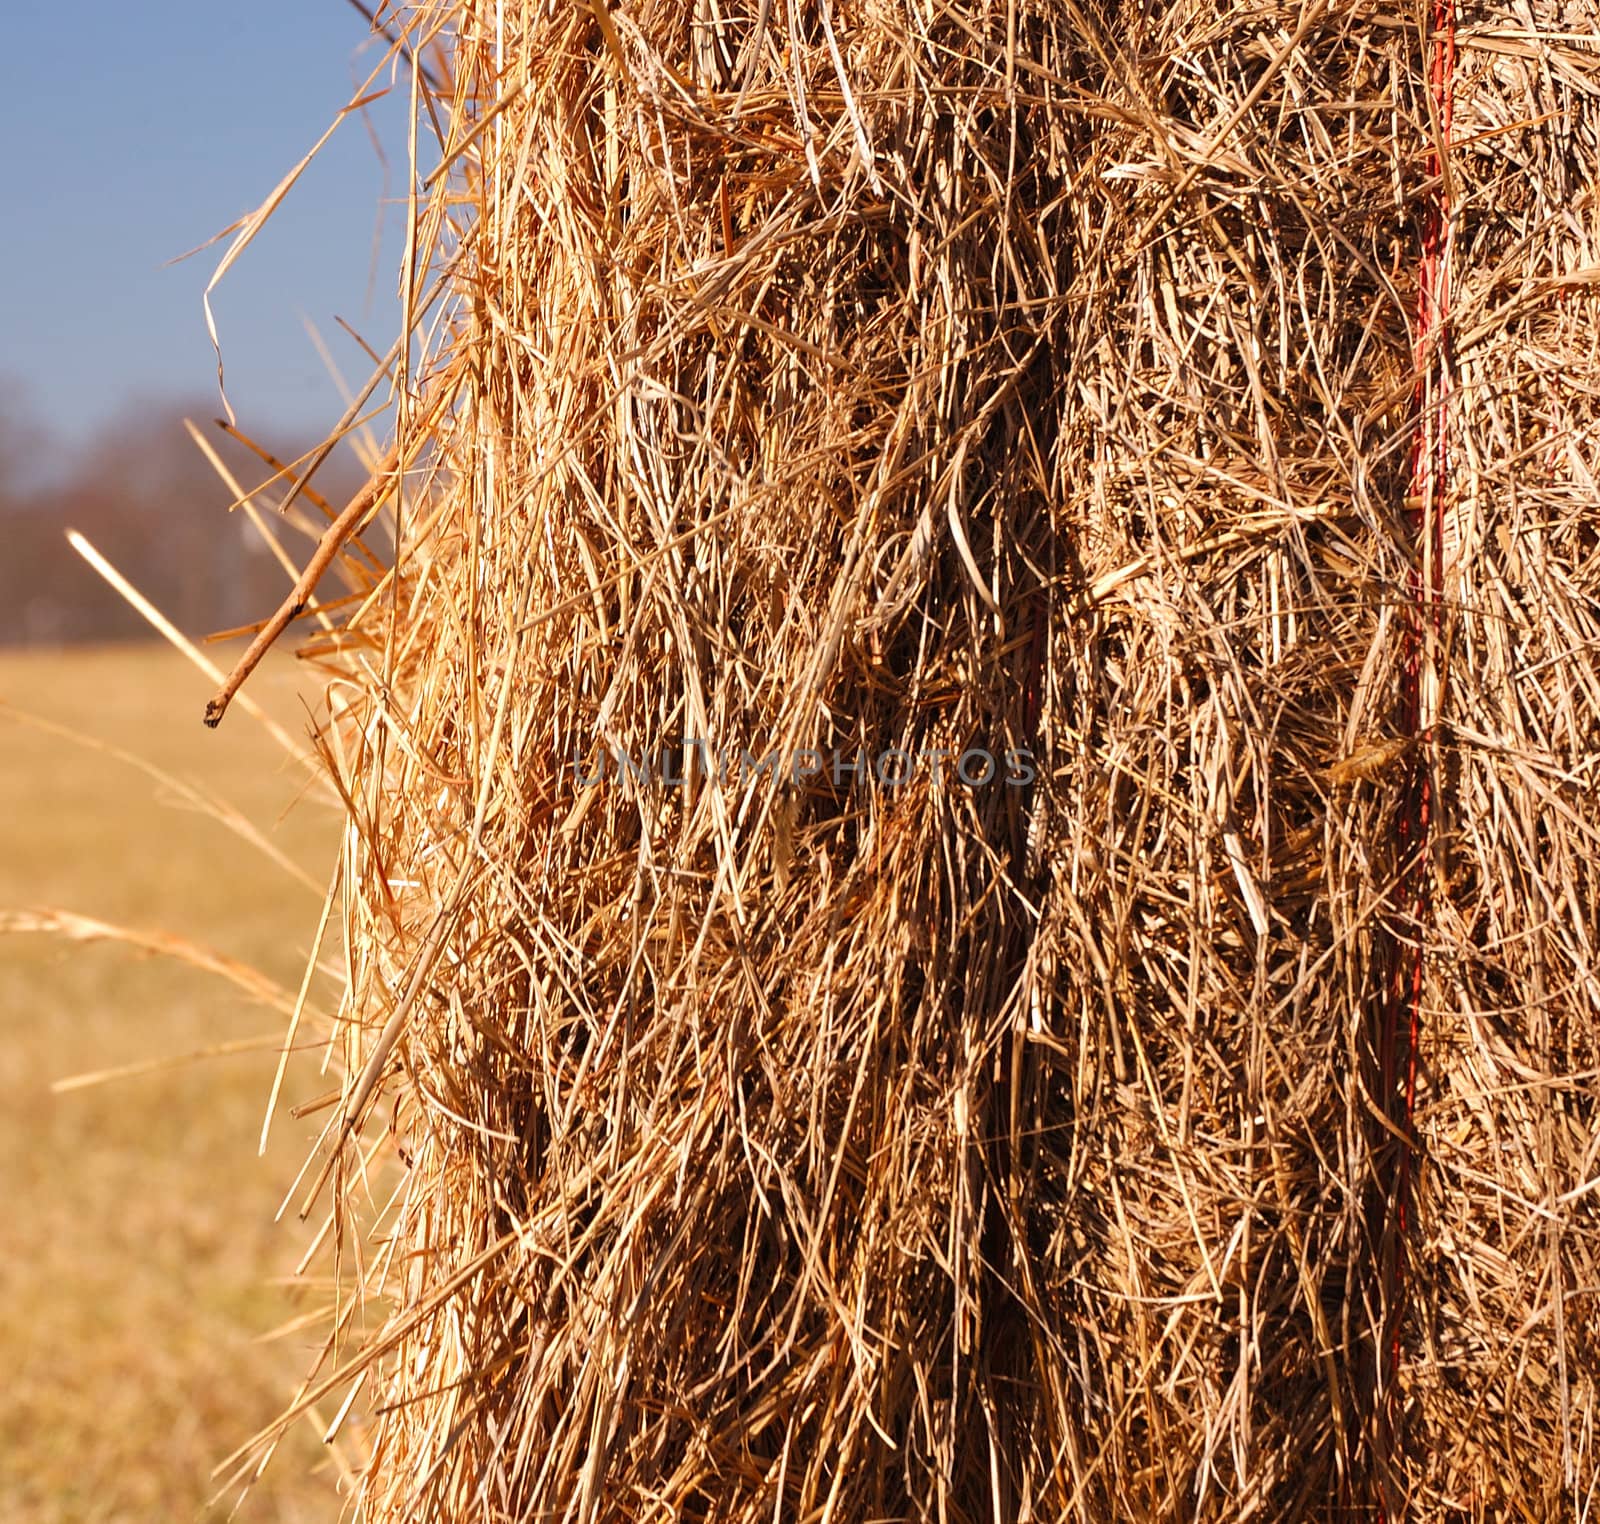 A haybale shown up close after a harvest